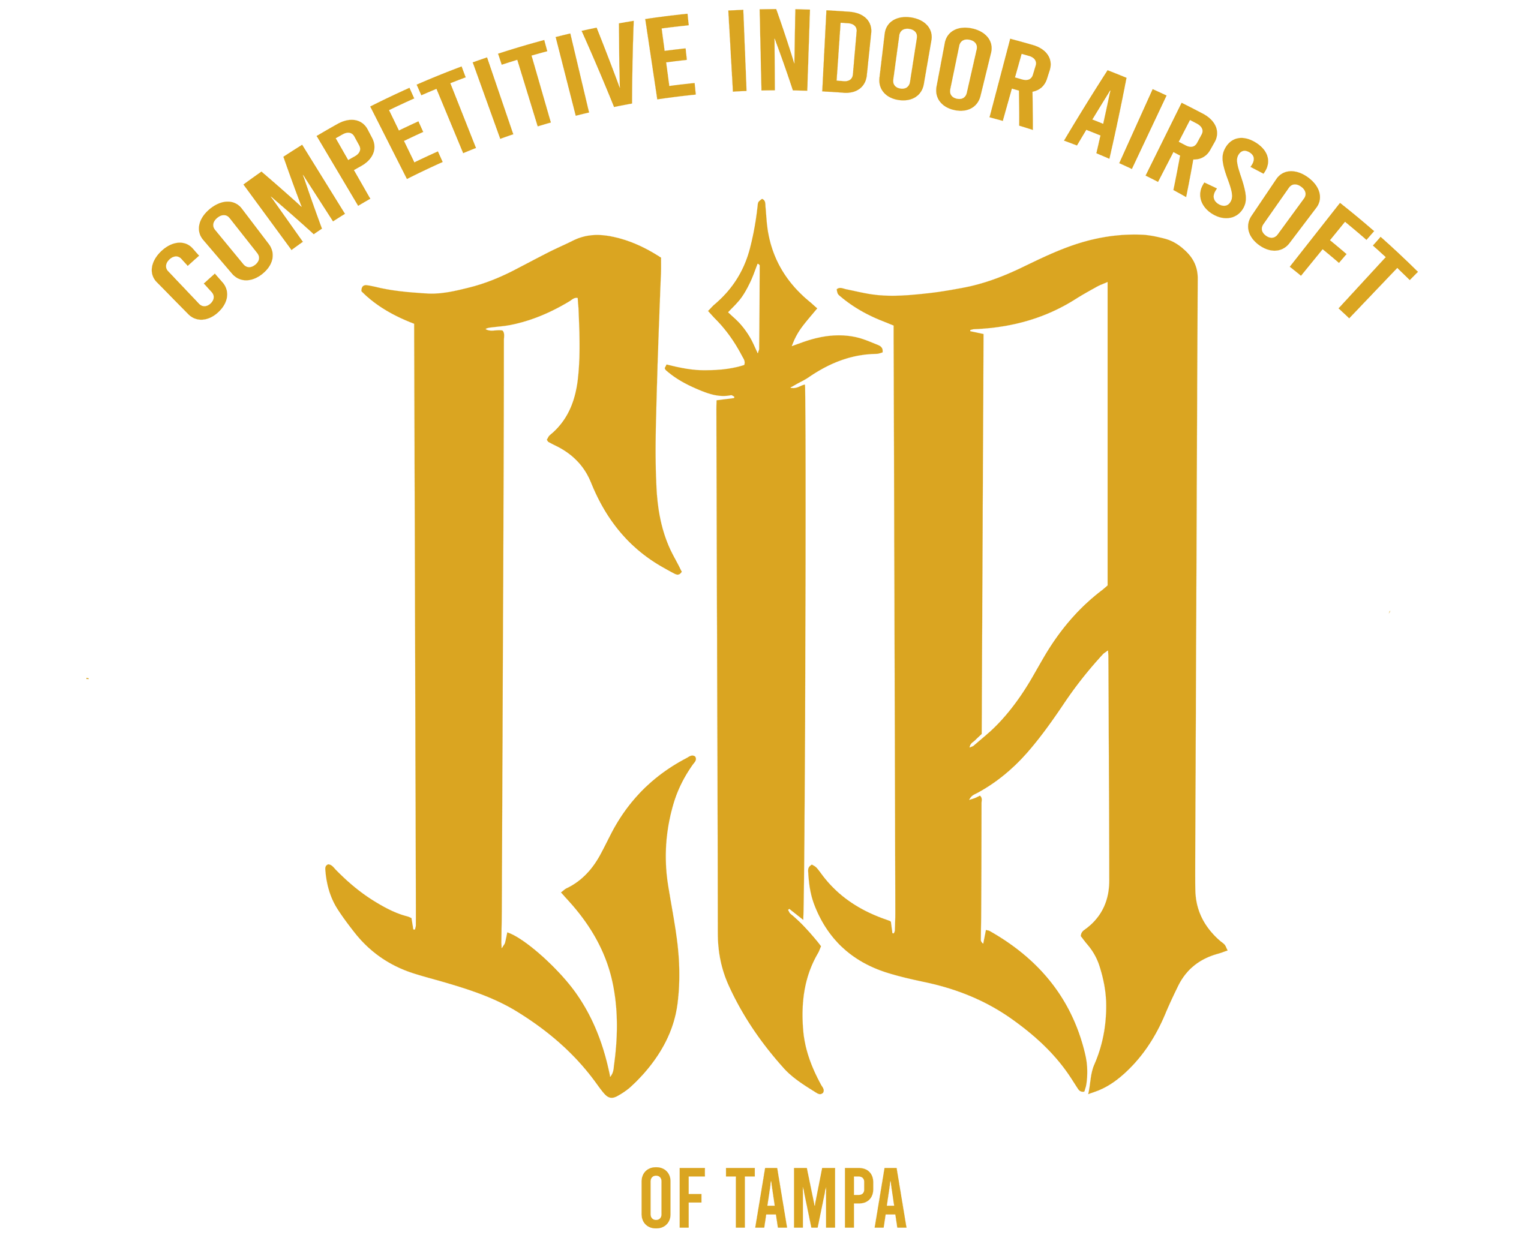 Competitive Indoor Airsoft